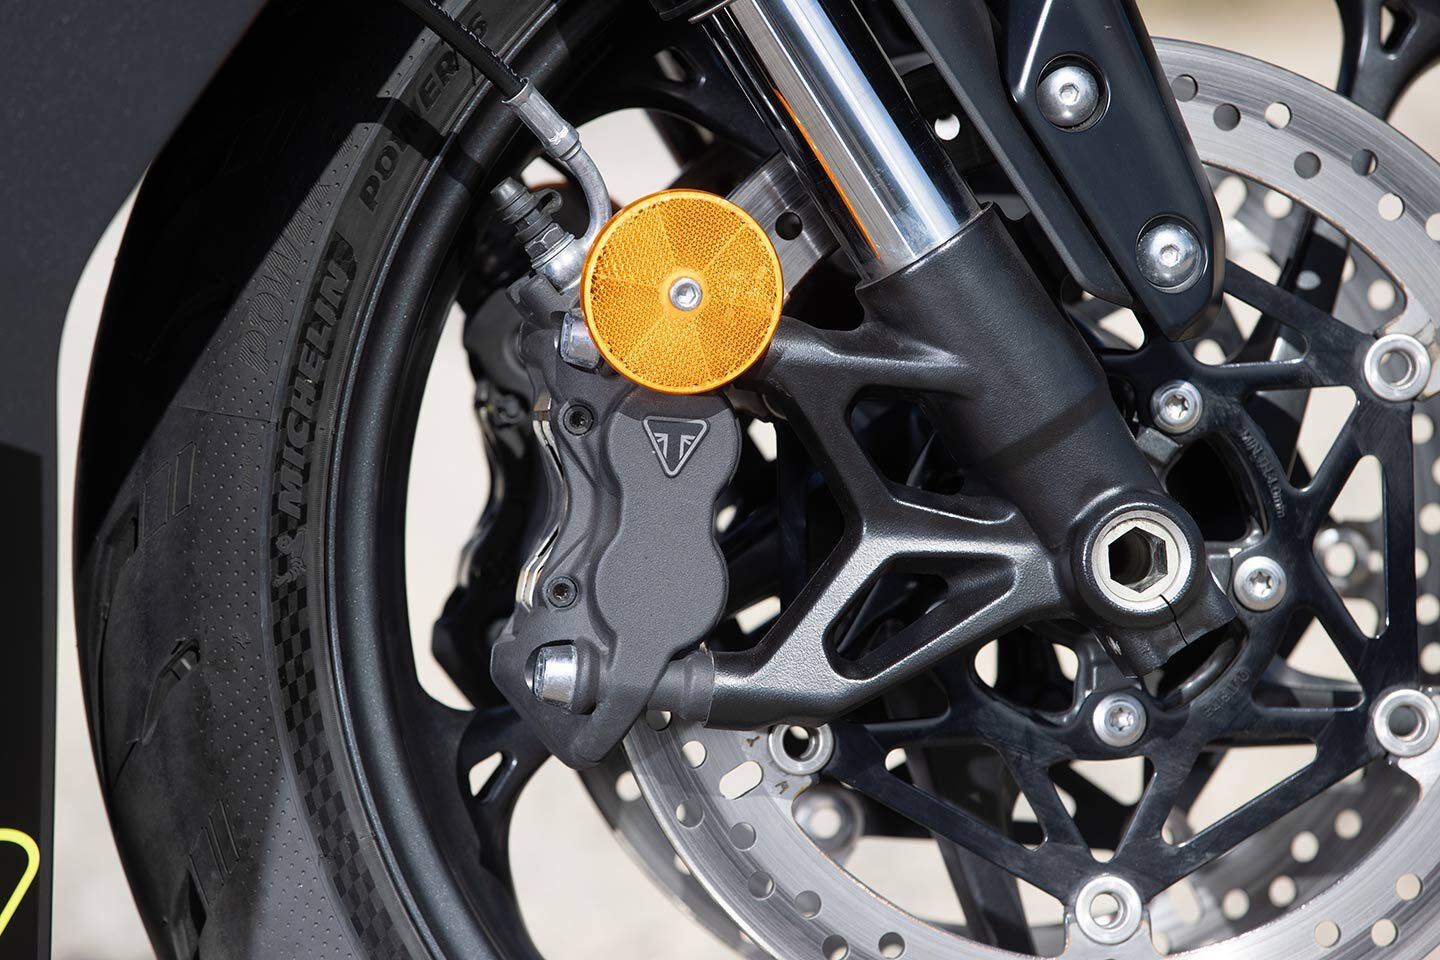 Up front are a pair of four-piston radial-mount calipers. The Showa SFF-BP fork is not adjustable.